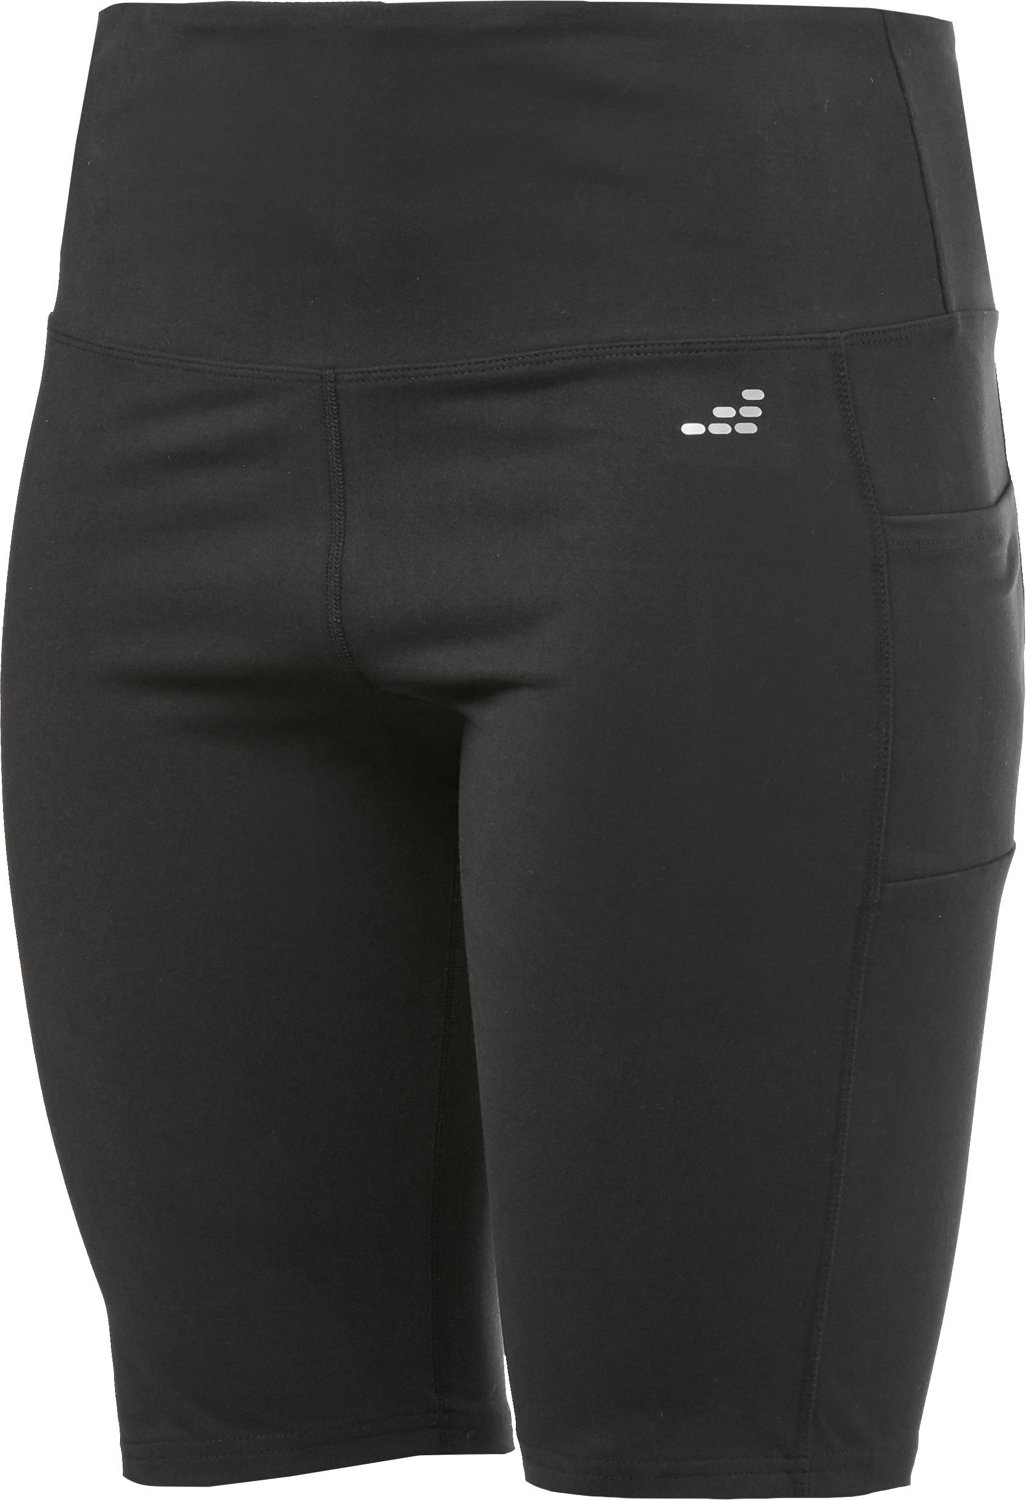 Under Armour Women's Play Up 3.0 Plus Size Shorts